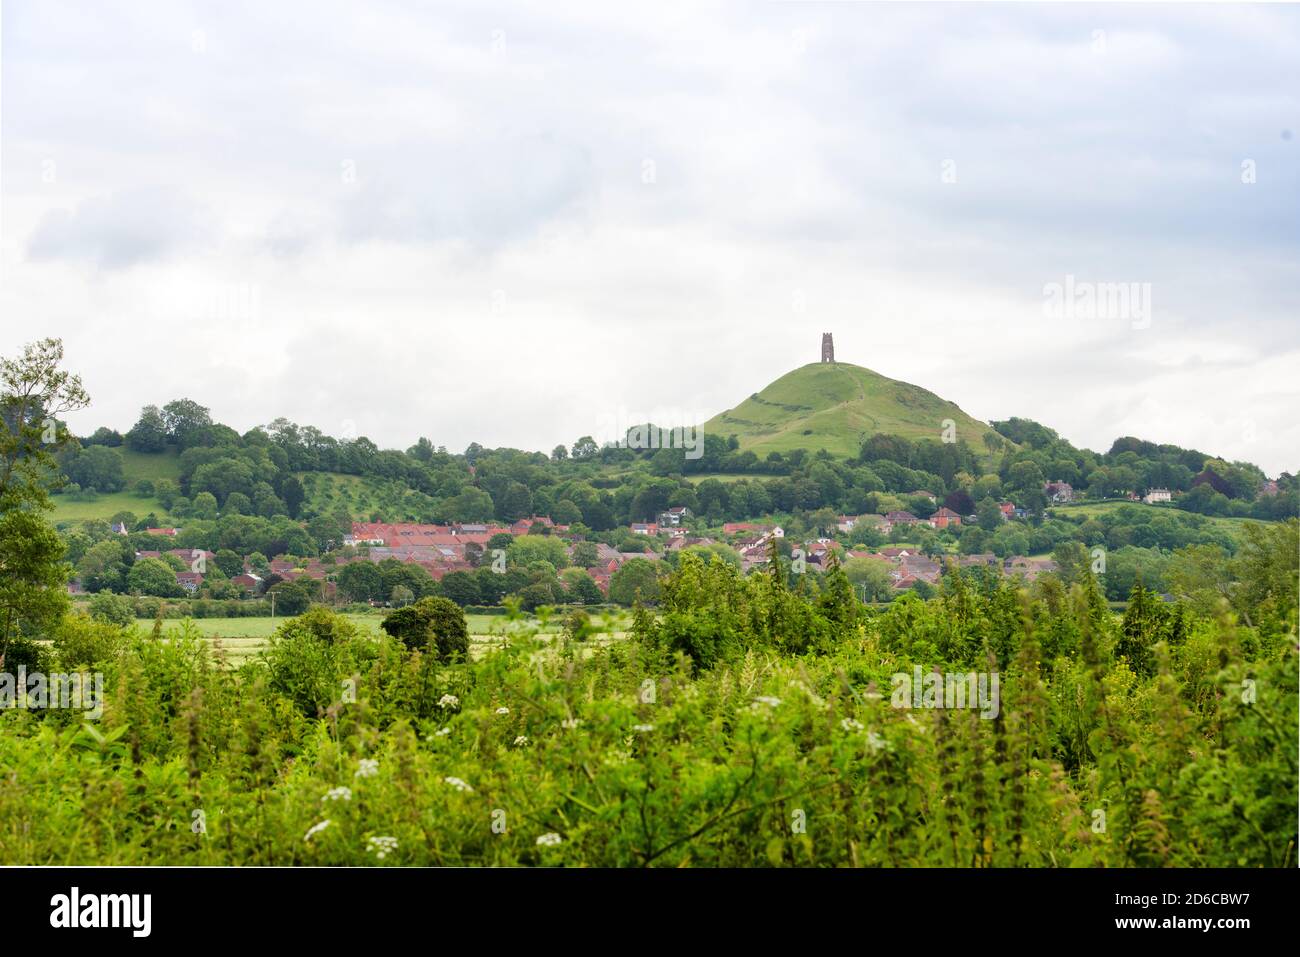 Glastonbury, England green field in foreground of red-roofed Glastonbury town. Glastonbury Tor towers in the background. Lots of copy-space. No people. Stock Photo